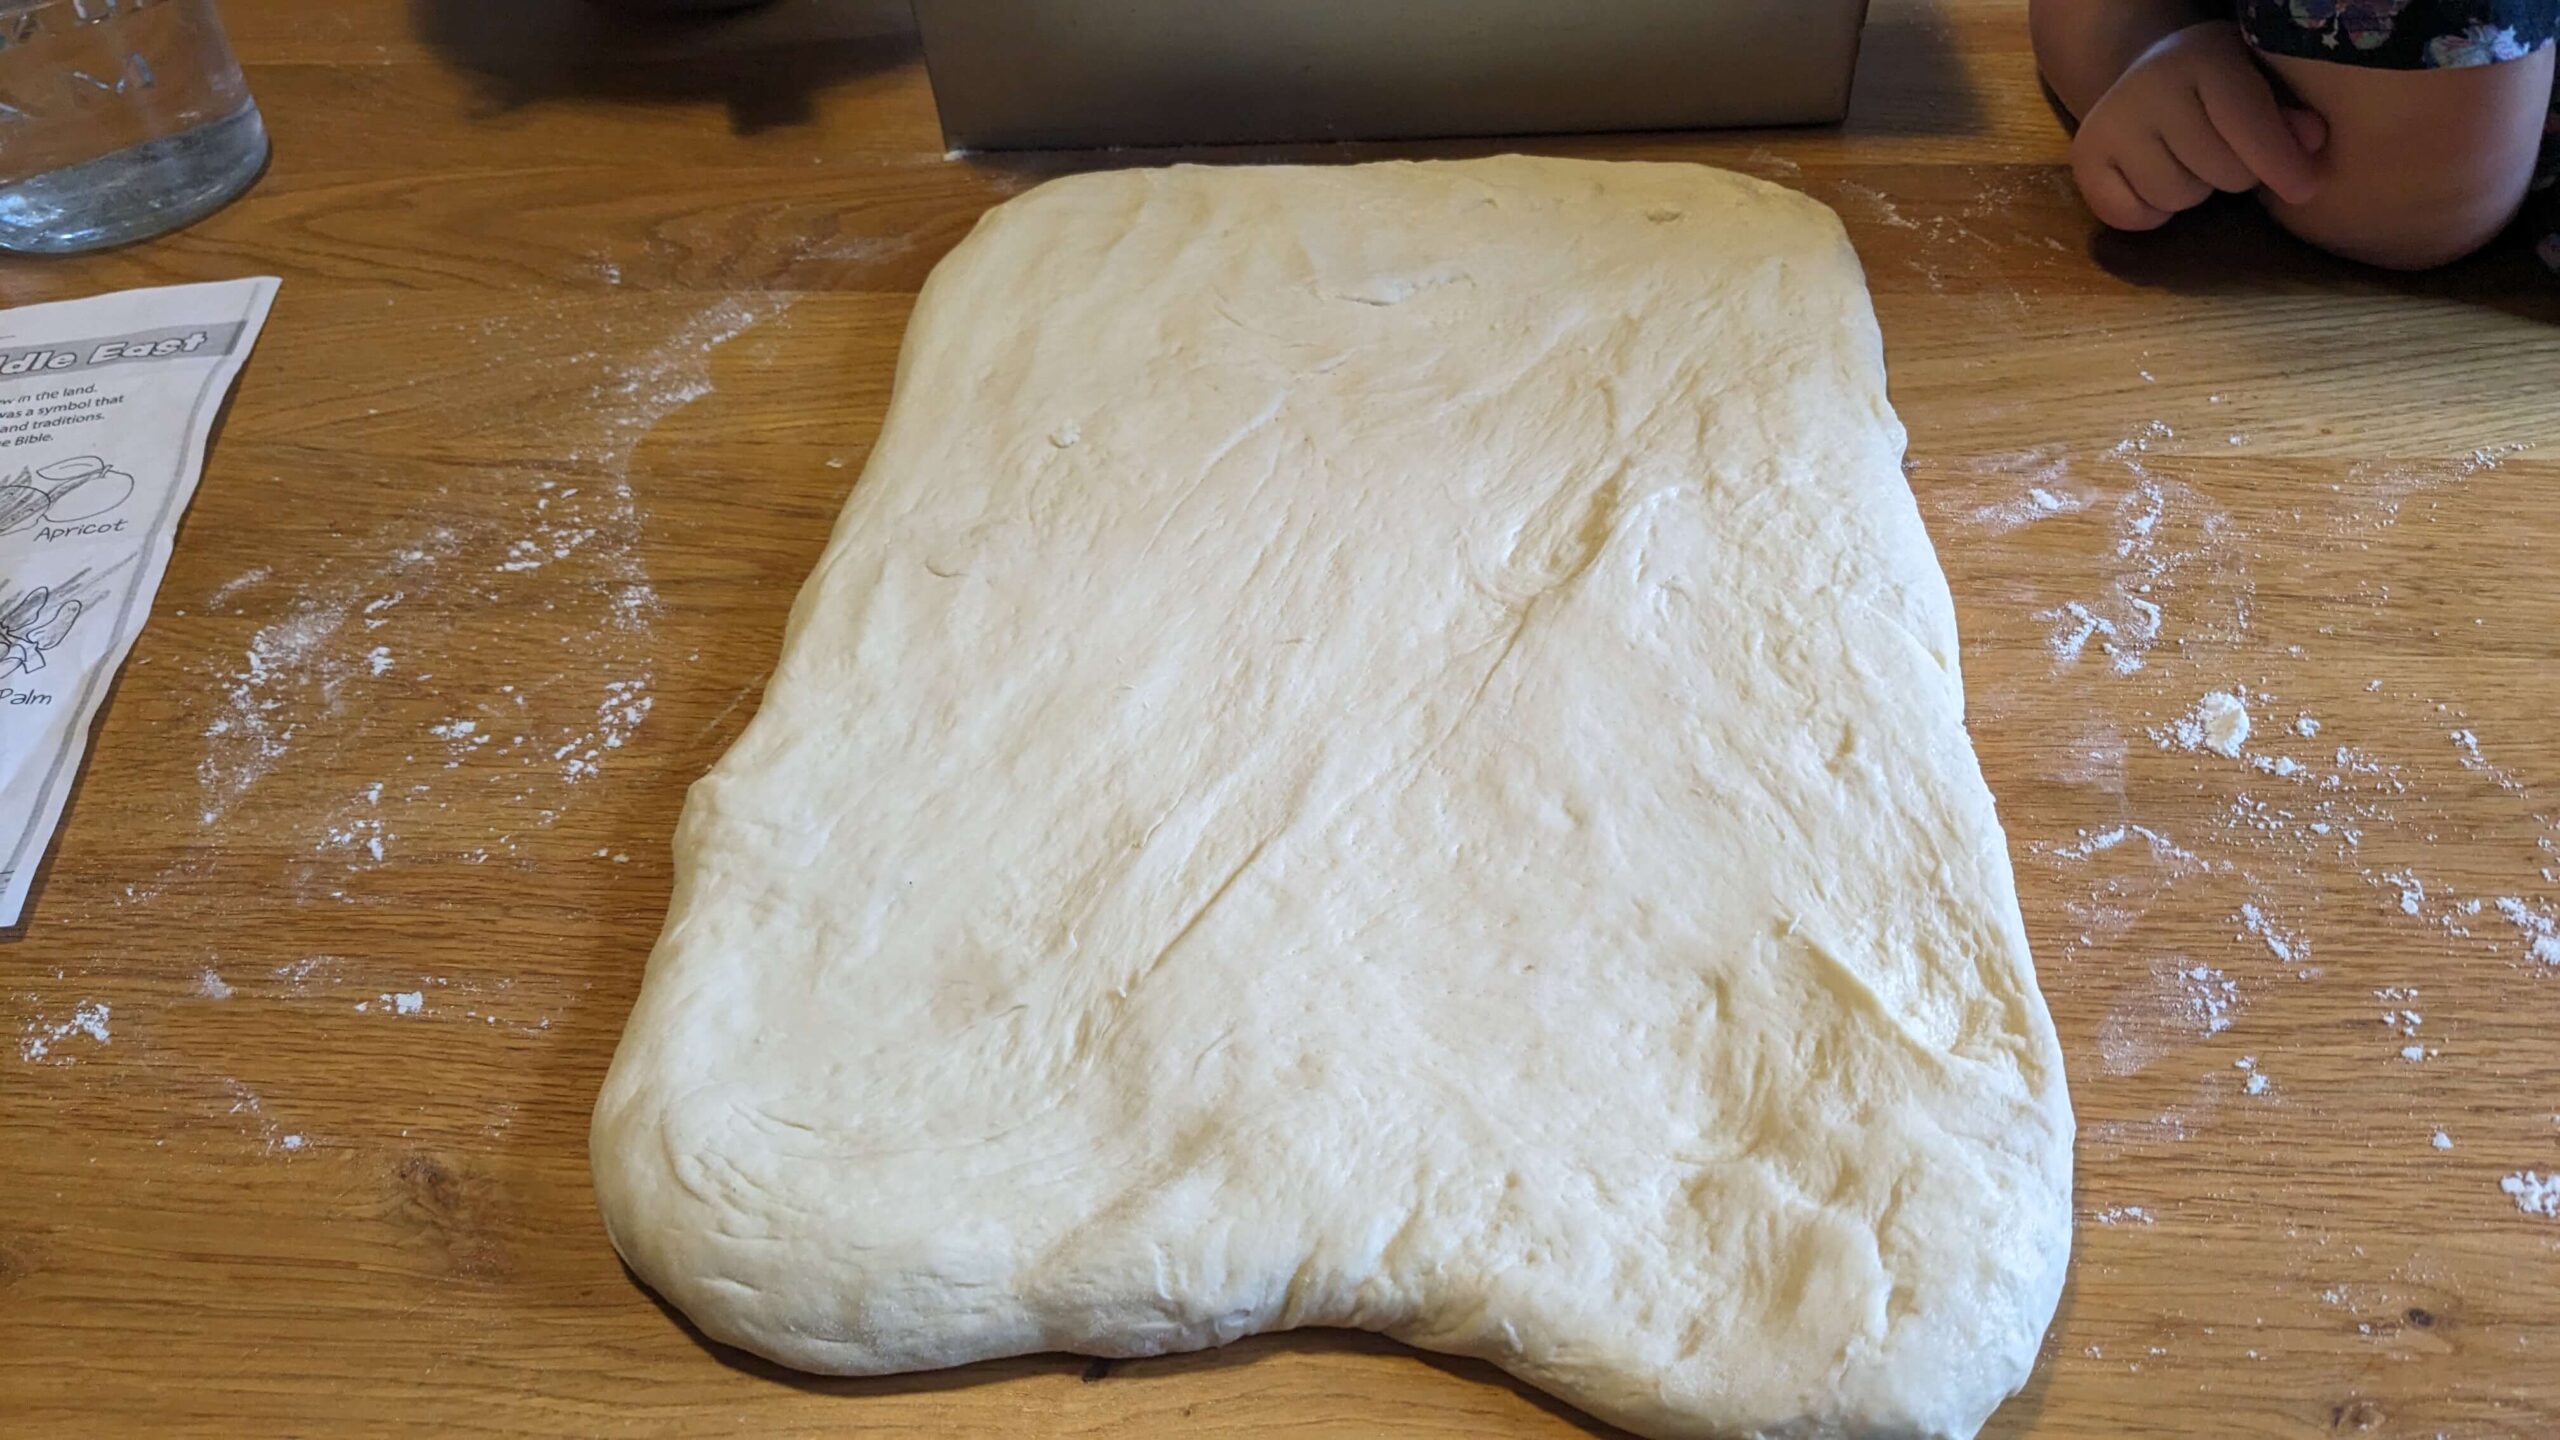 bread dough in the shape of a rectangle on a wooden surface